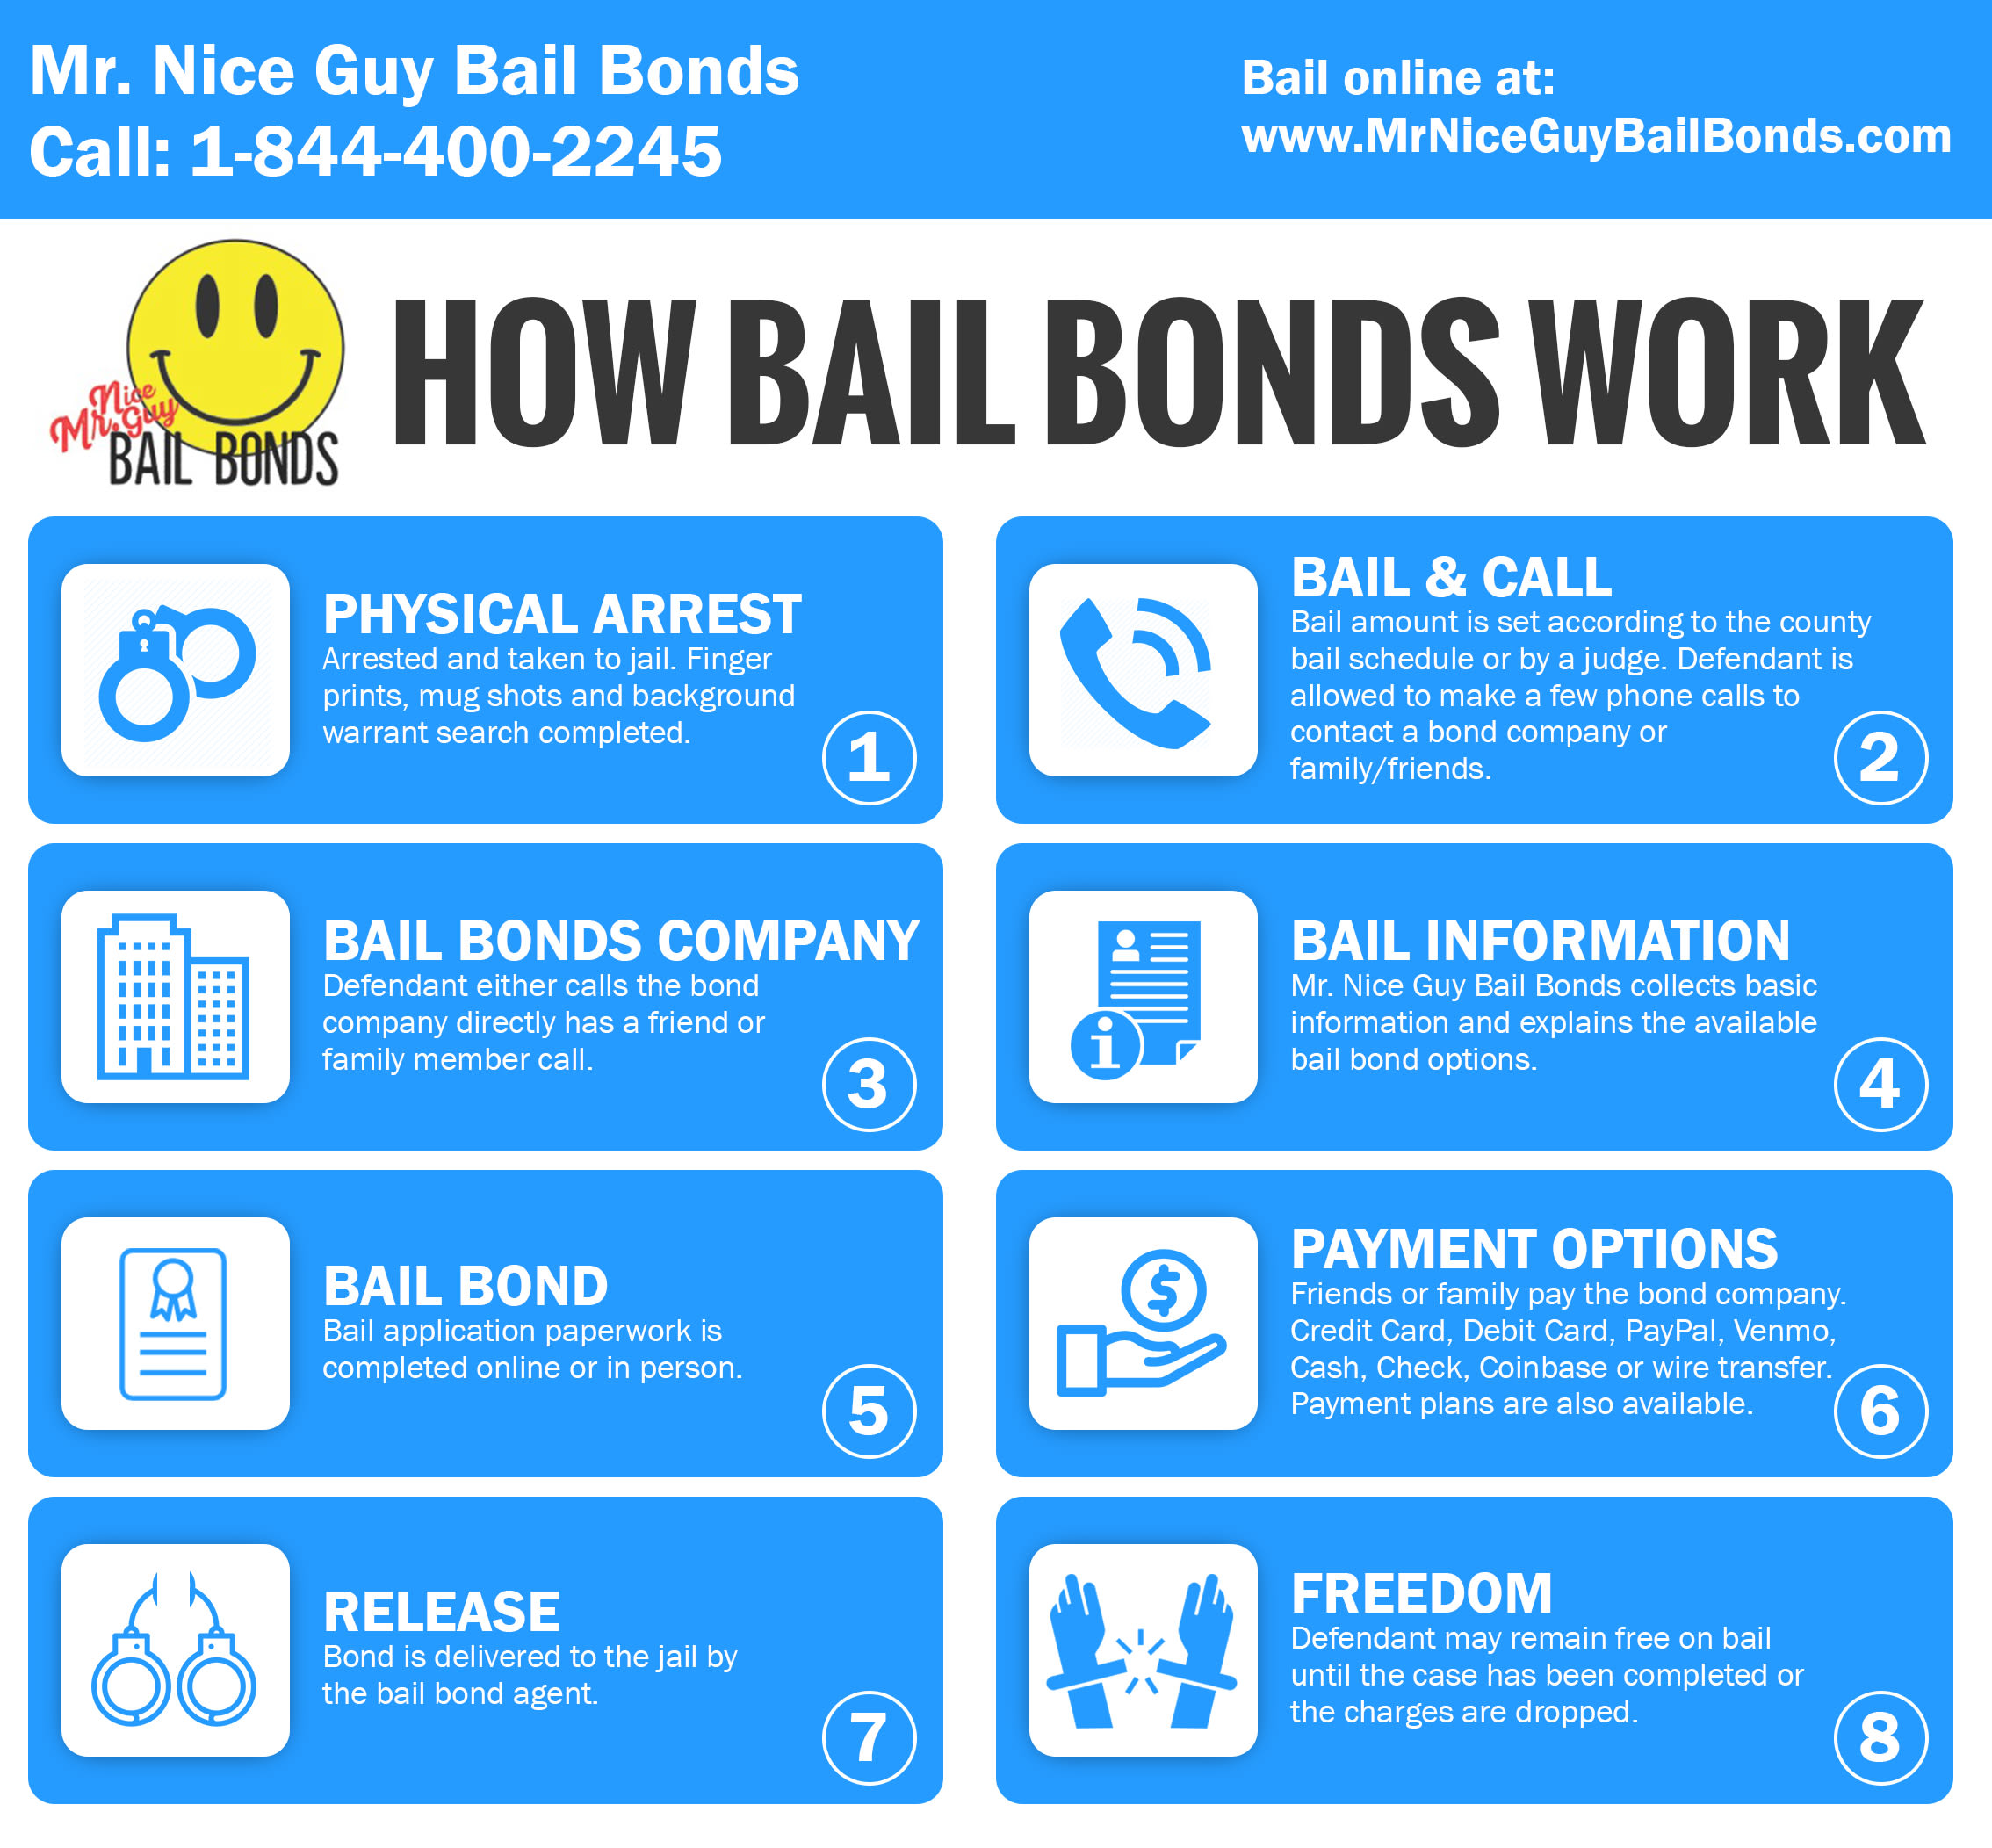 How bail bonds work in California infographic